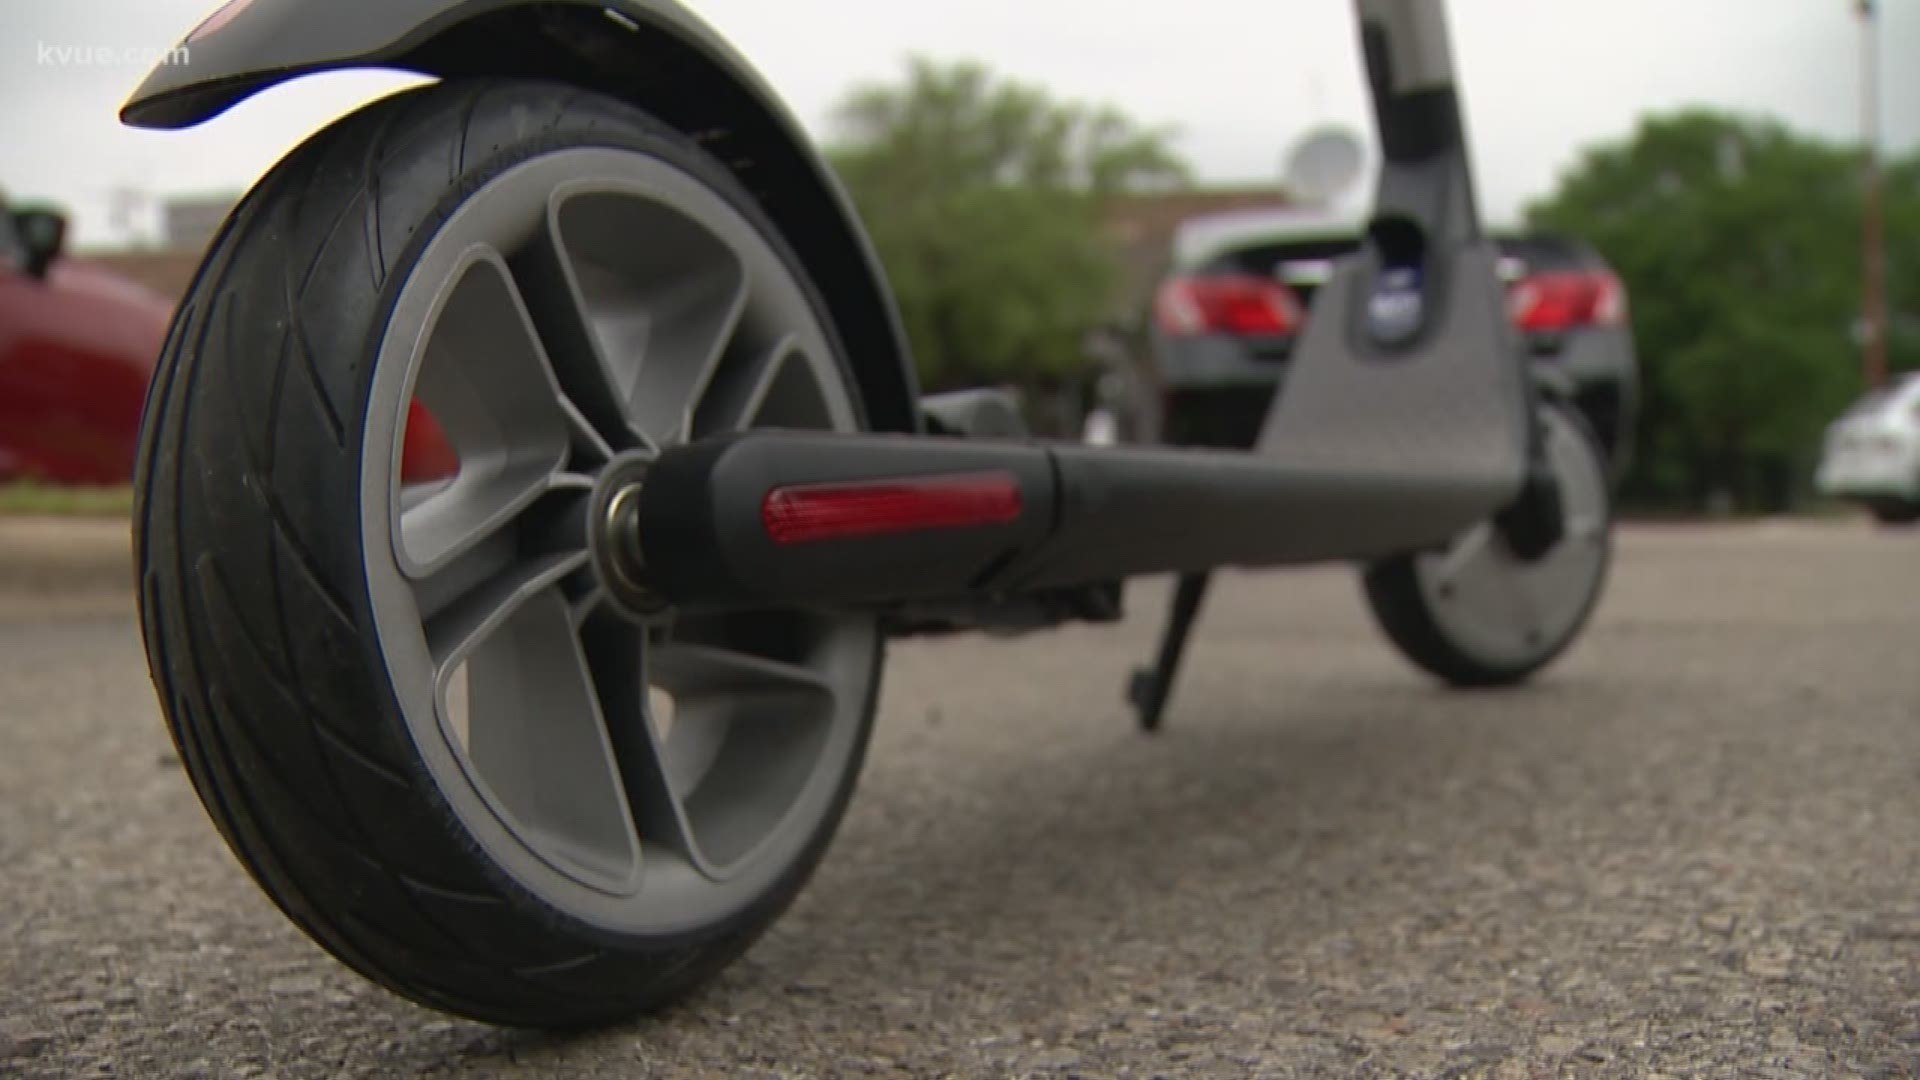 City leaders discuss new rules for scooters